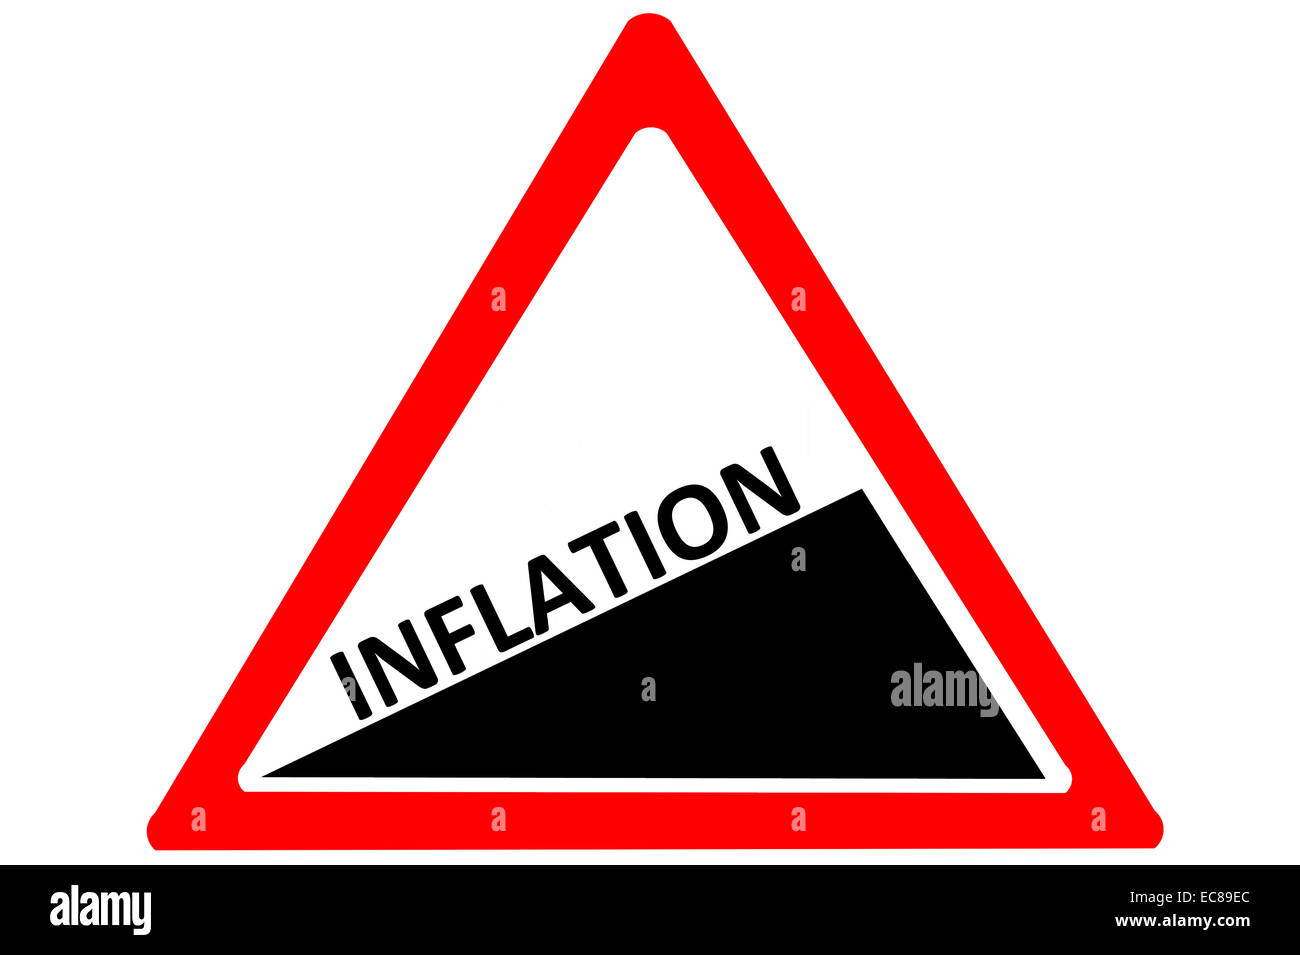 Inflation increasing warning road sign isolated on pure white background Stock Photo